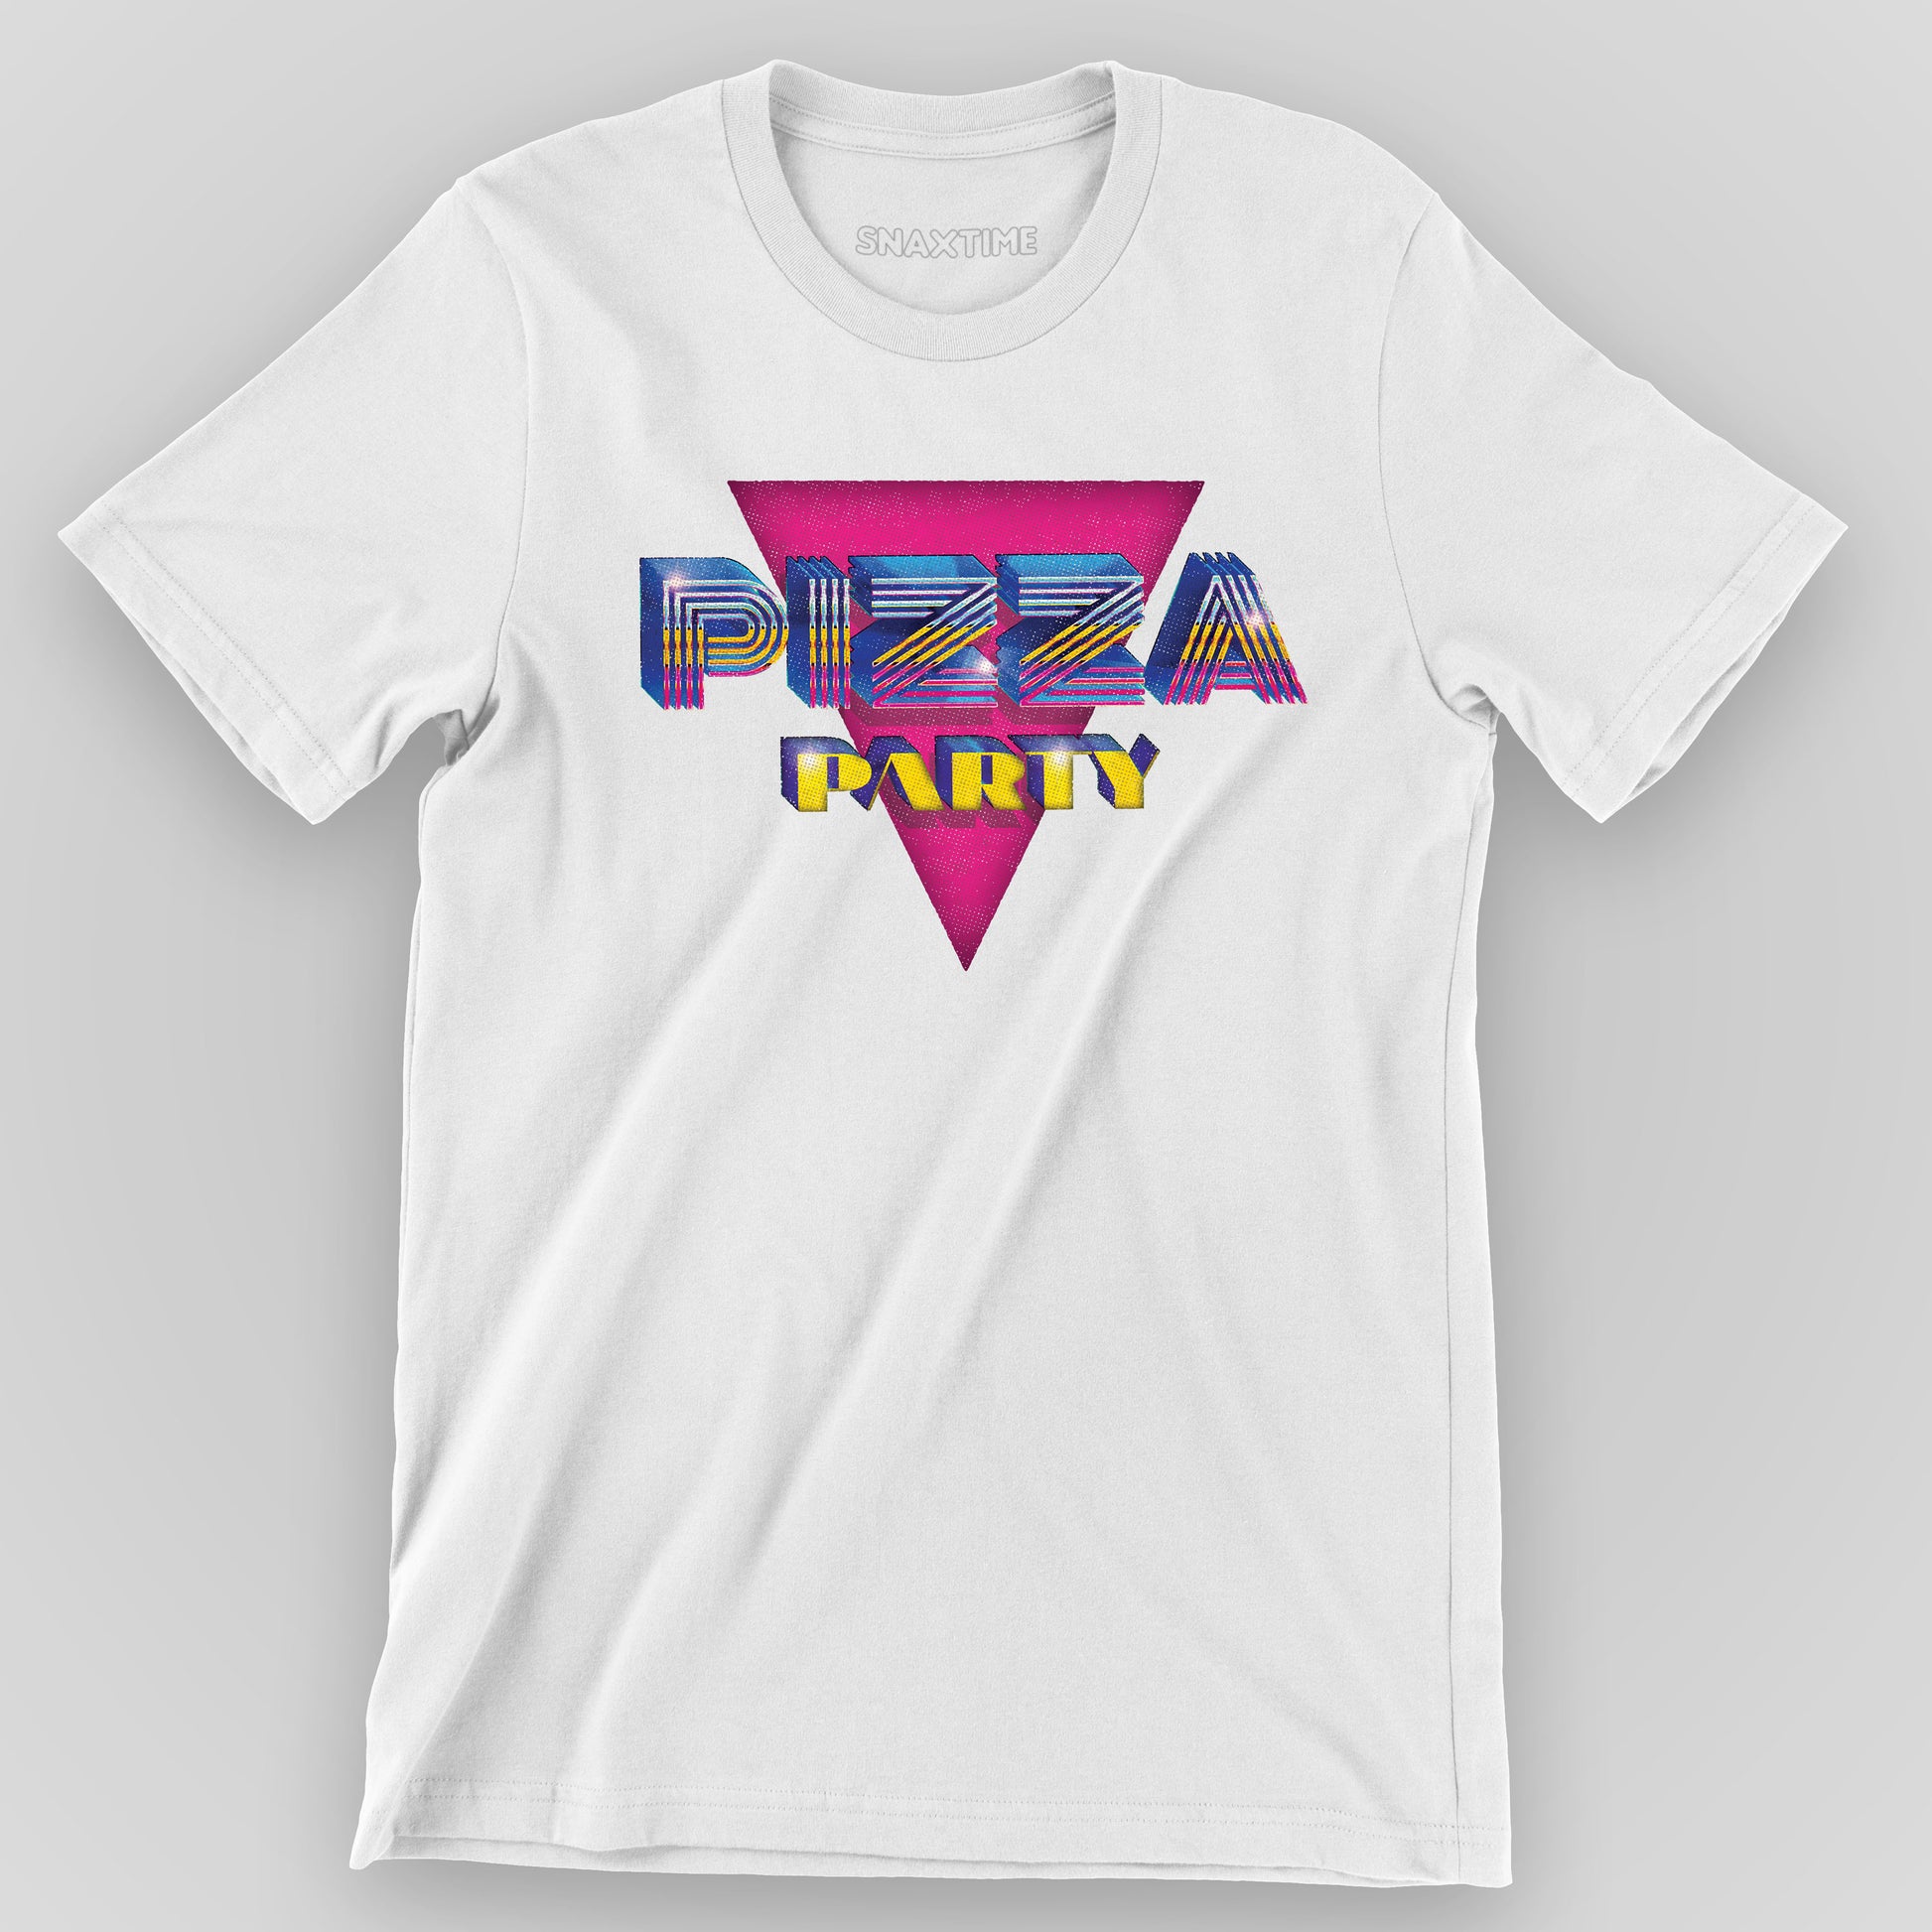 White Pizza Party Graphic T-Shirt by Snaxtime